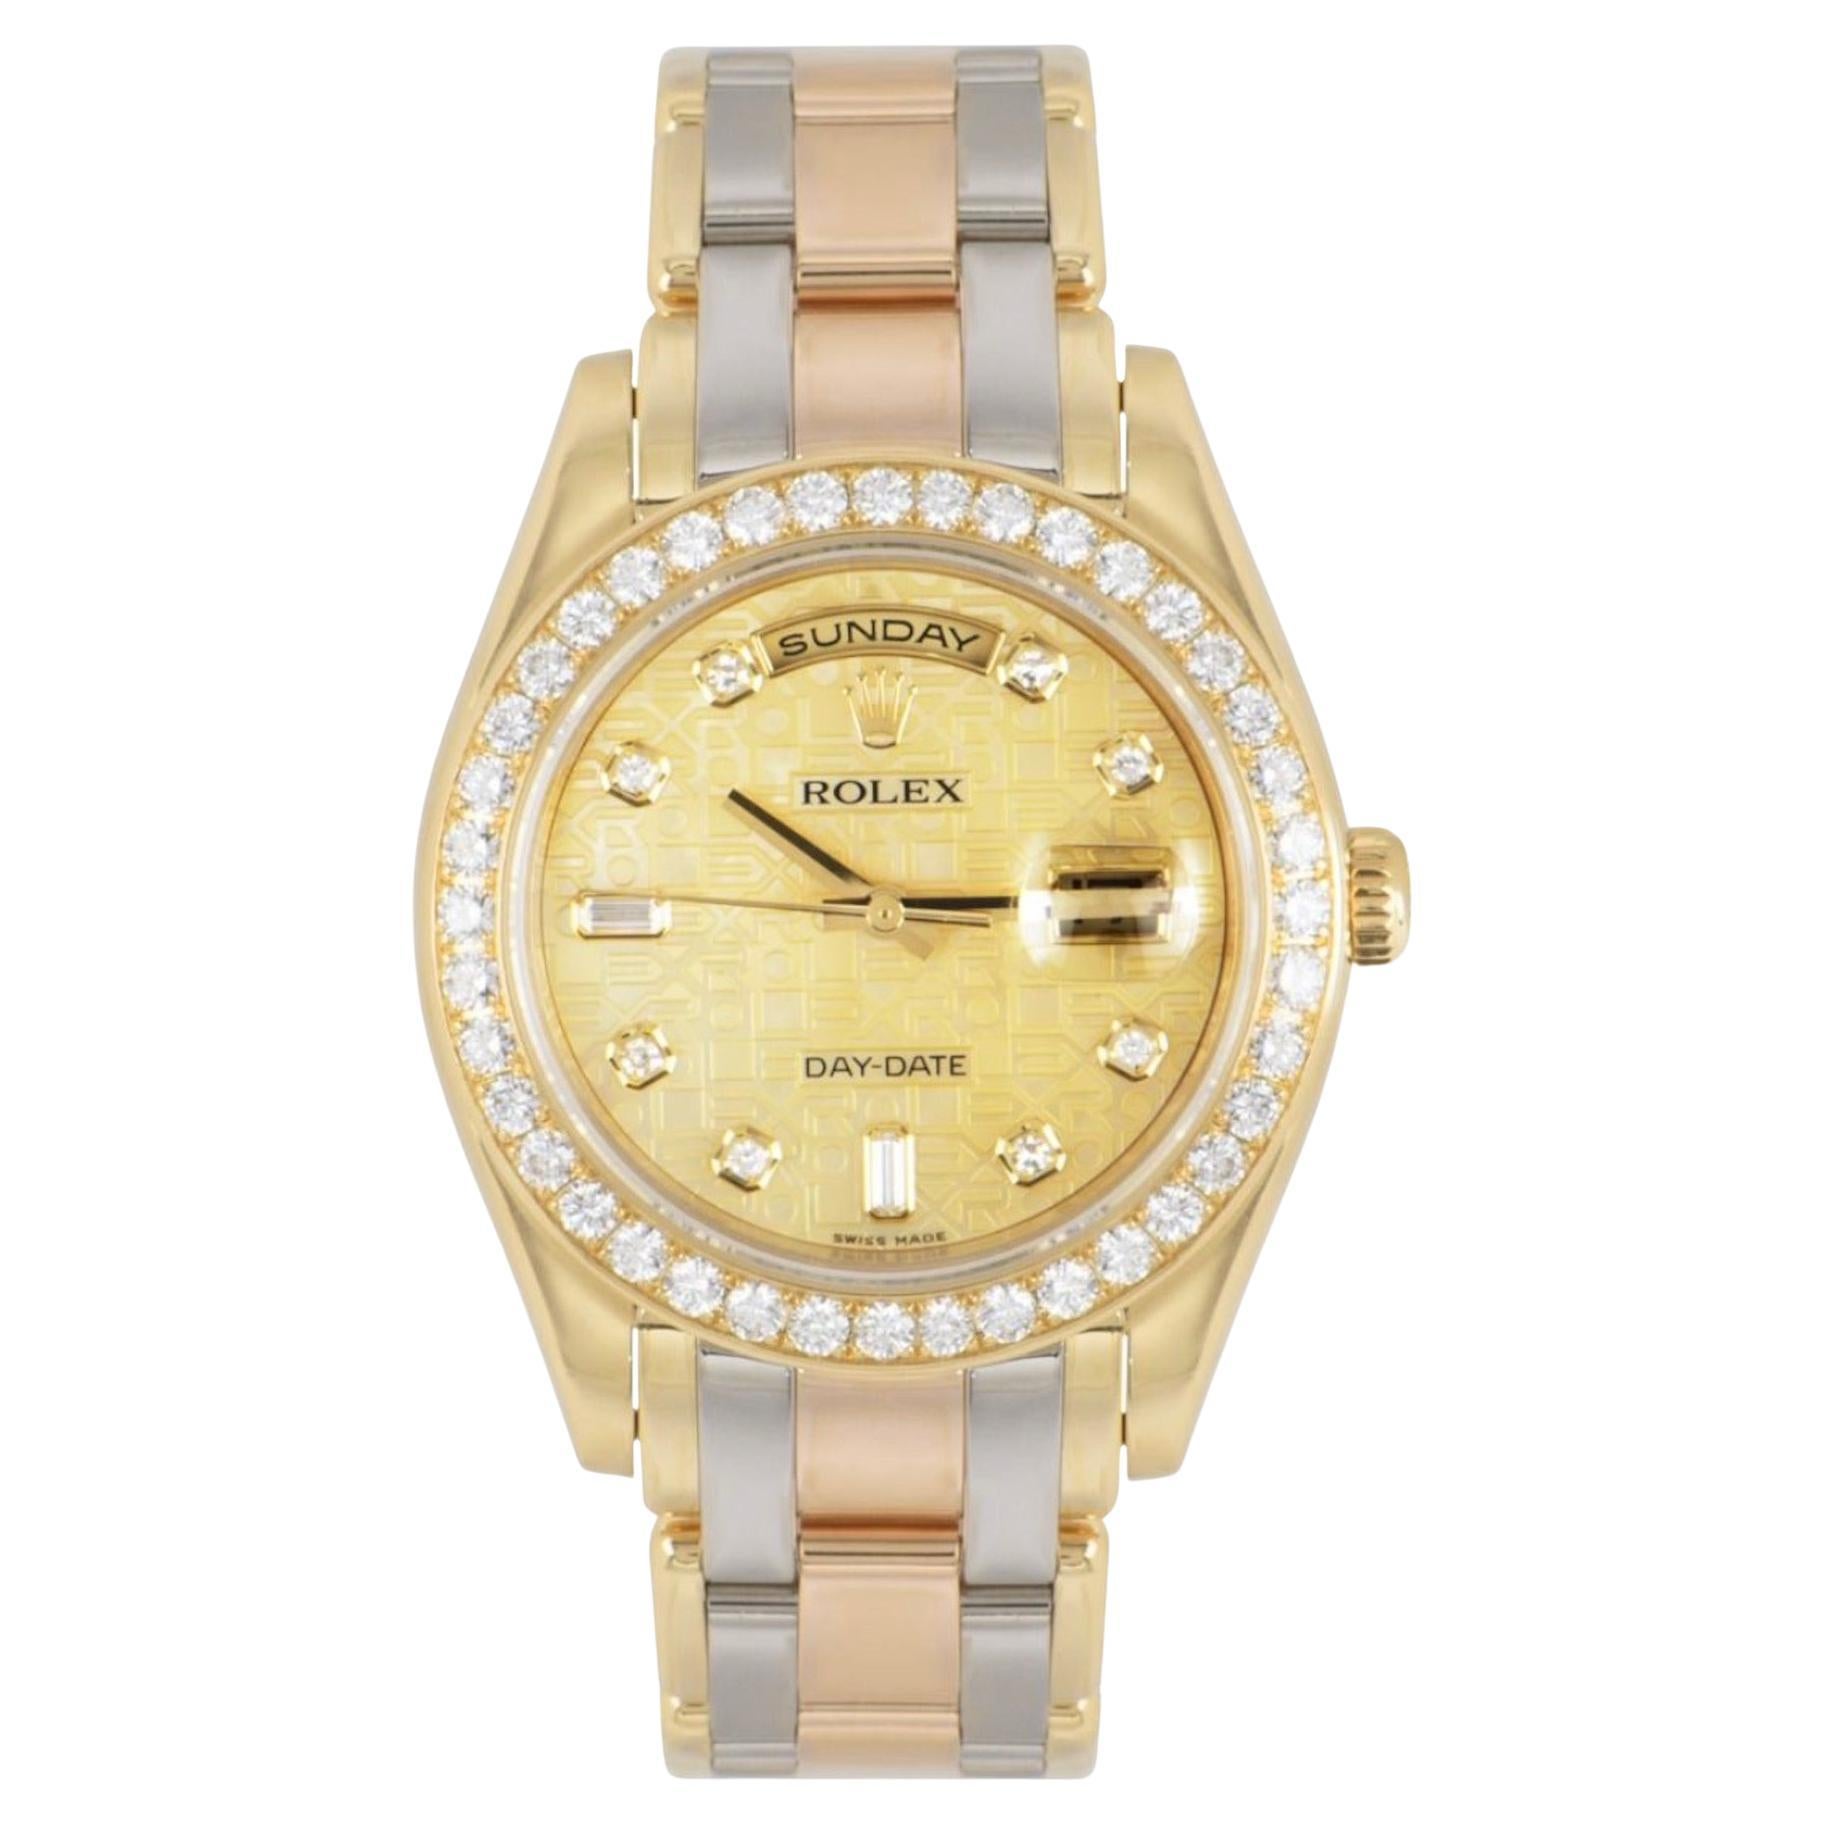 Rolex Day-Date Masterpiece Pearlmaster Diamond Set Watch For Sale